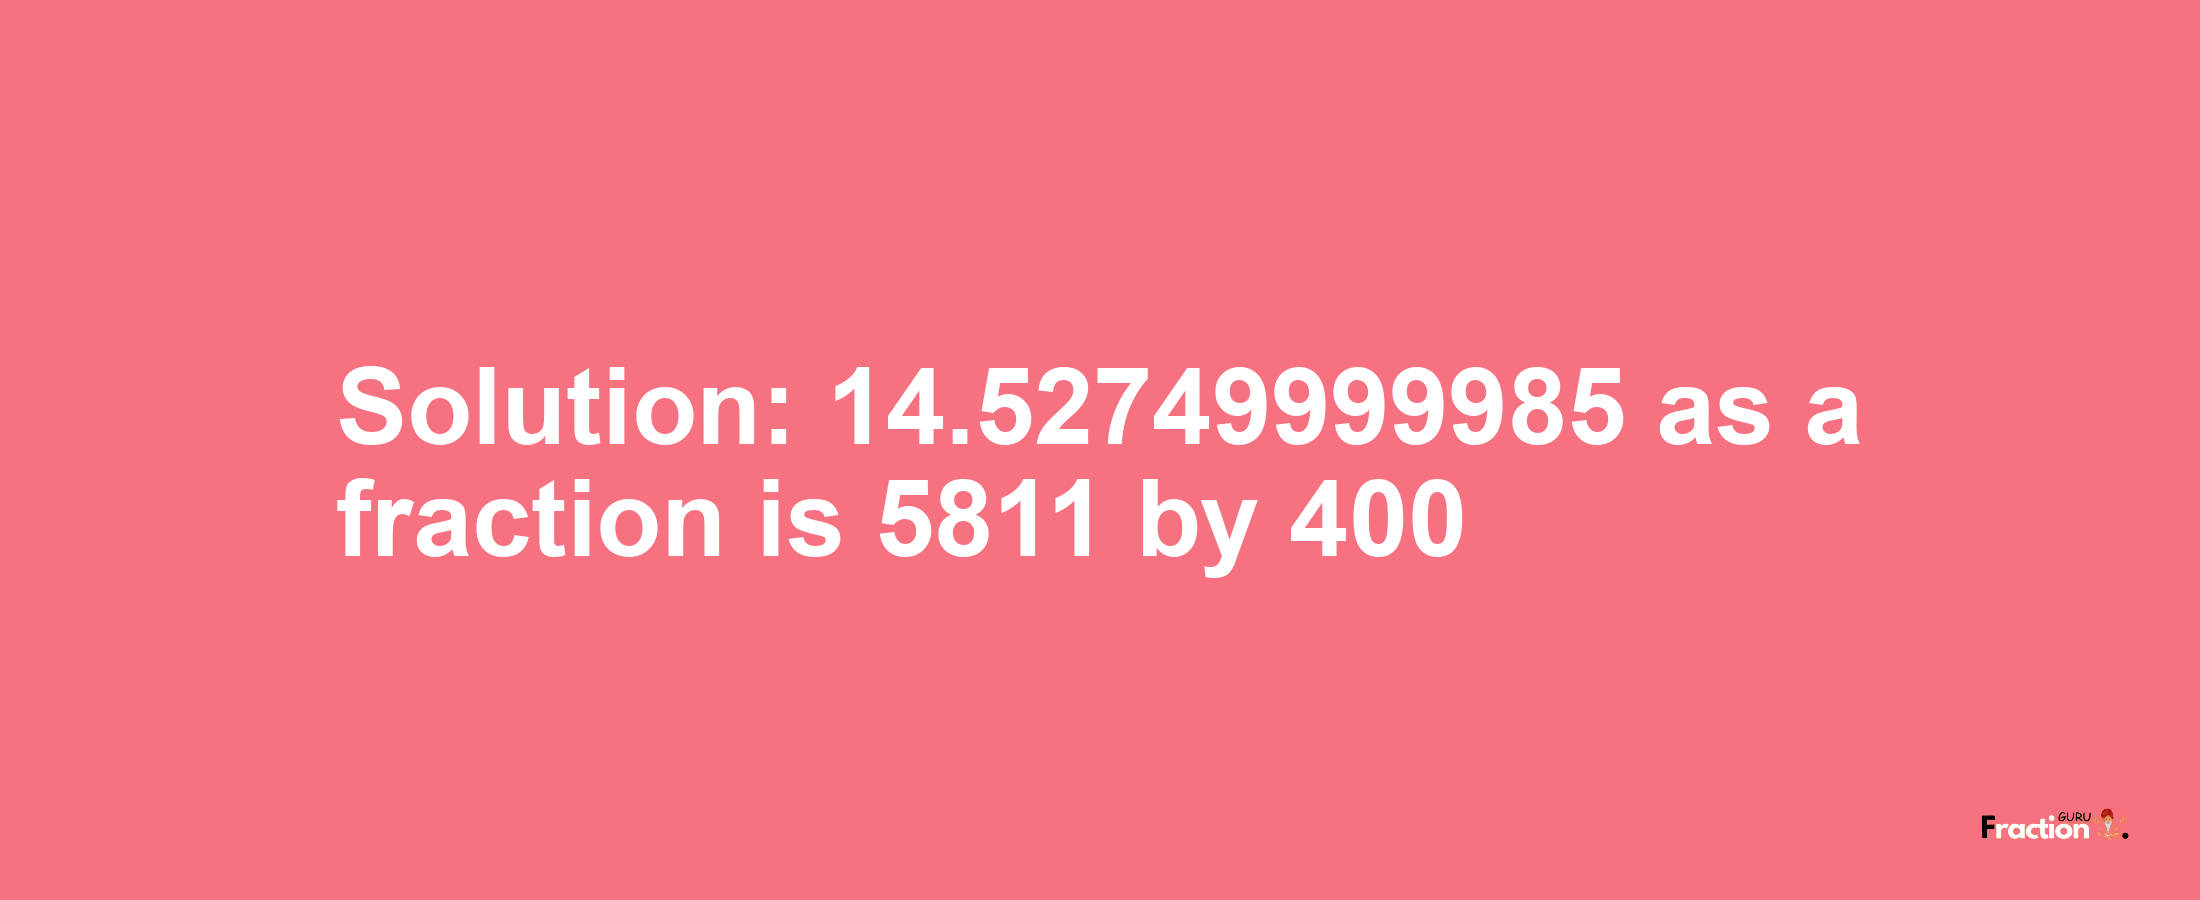 Solution:14.52749999985 as a fraction is 5811/400